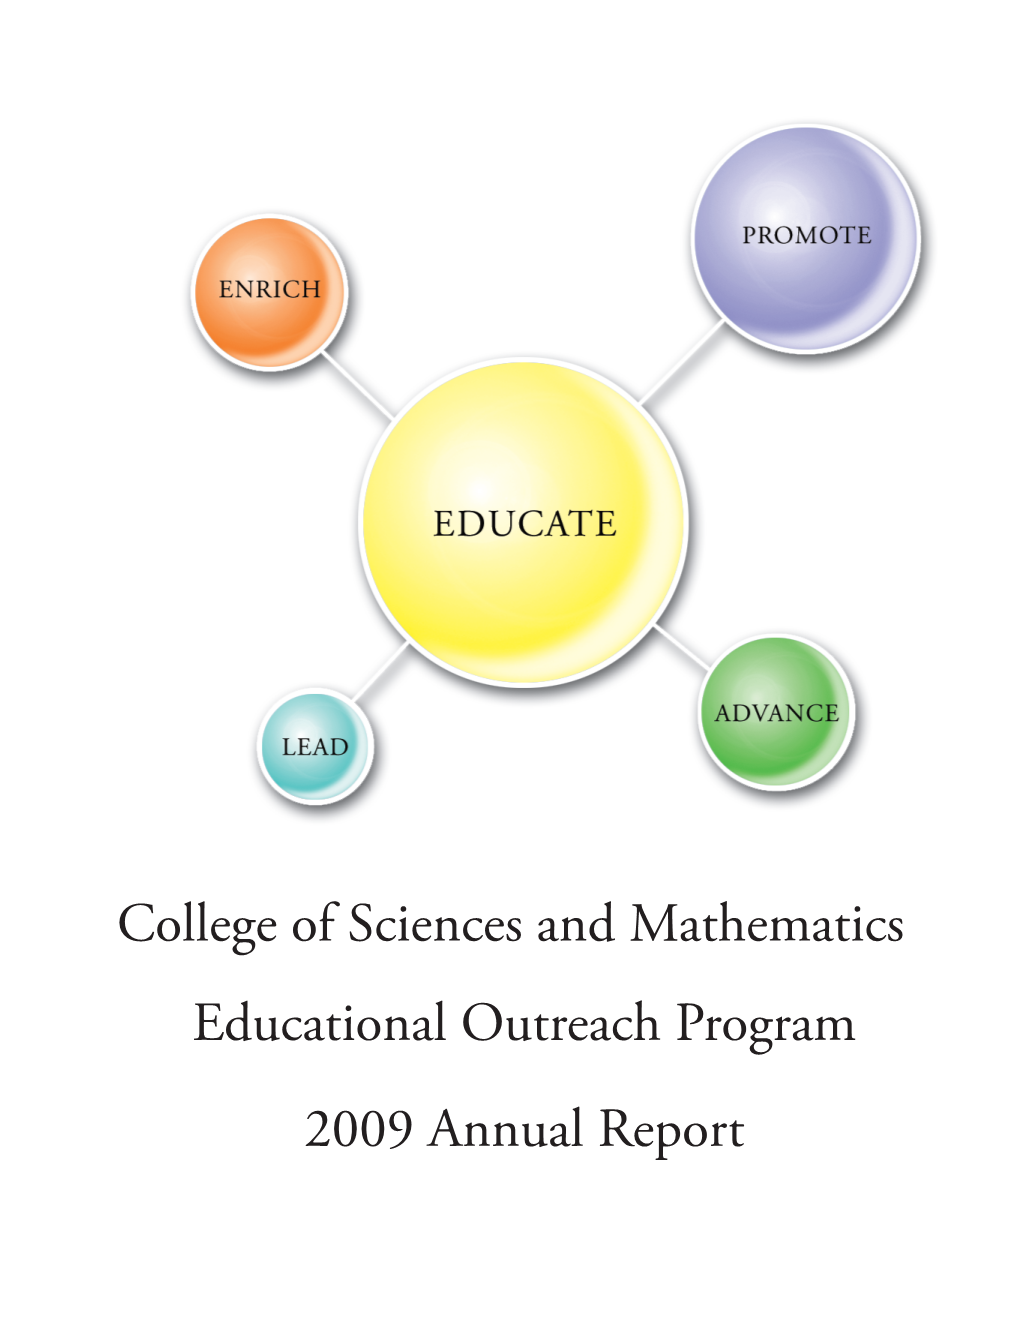 College of Sciences and Mathematics Educational Outreach Program 2009 Annual Report